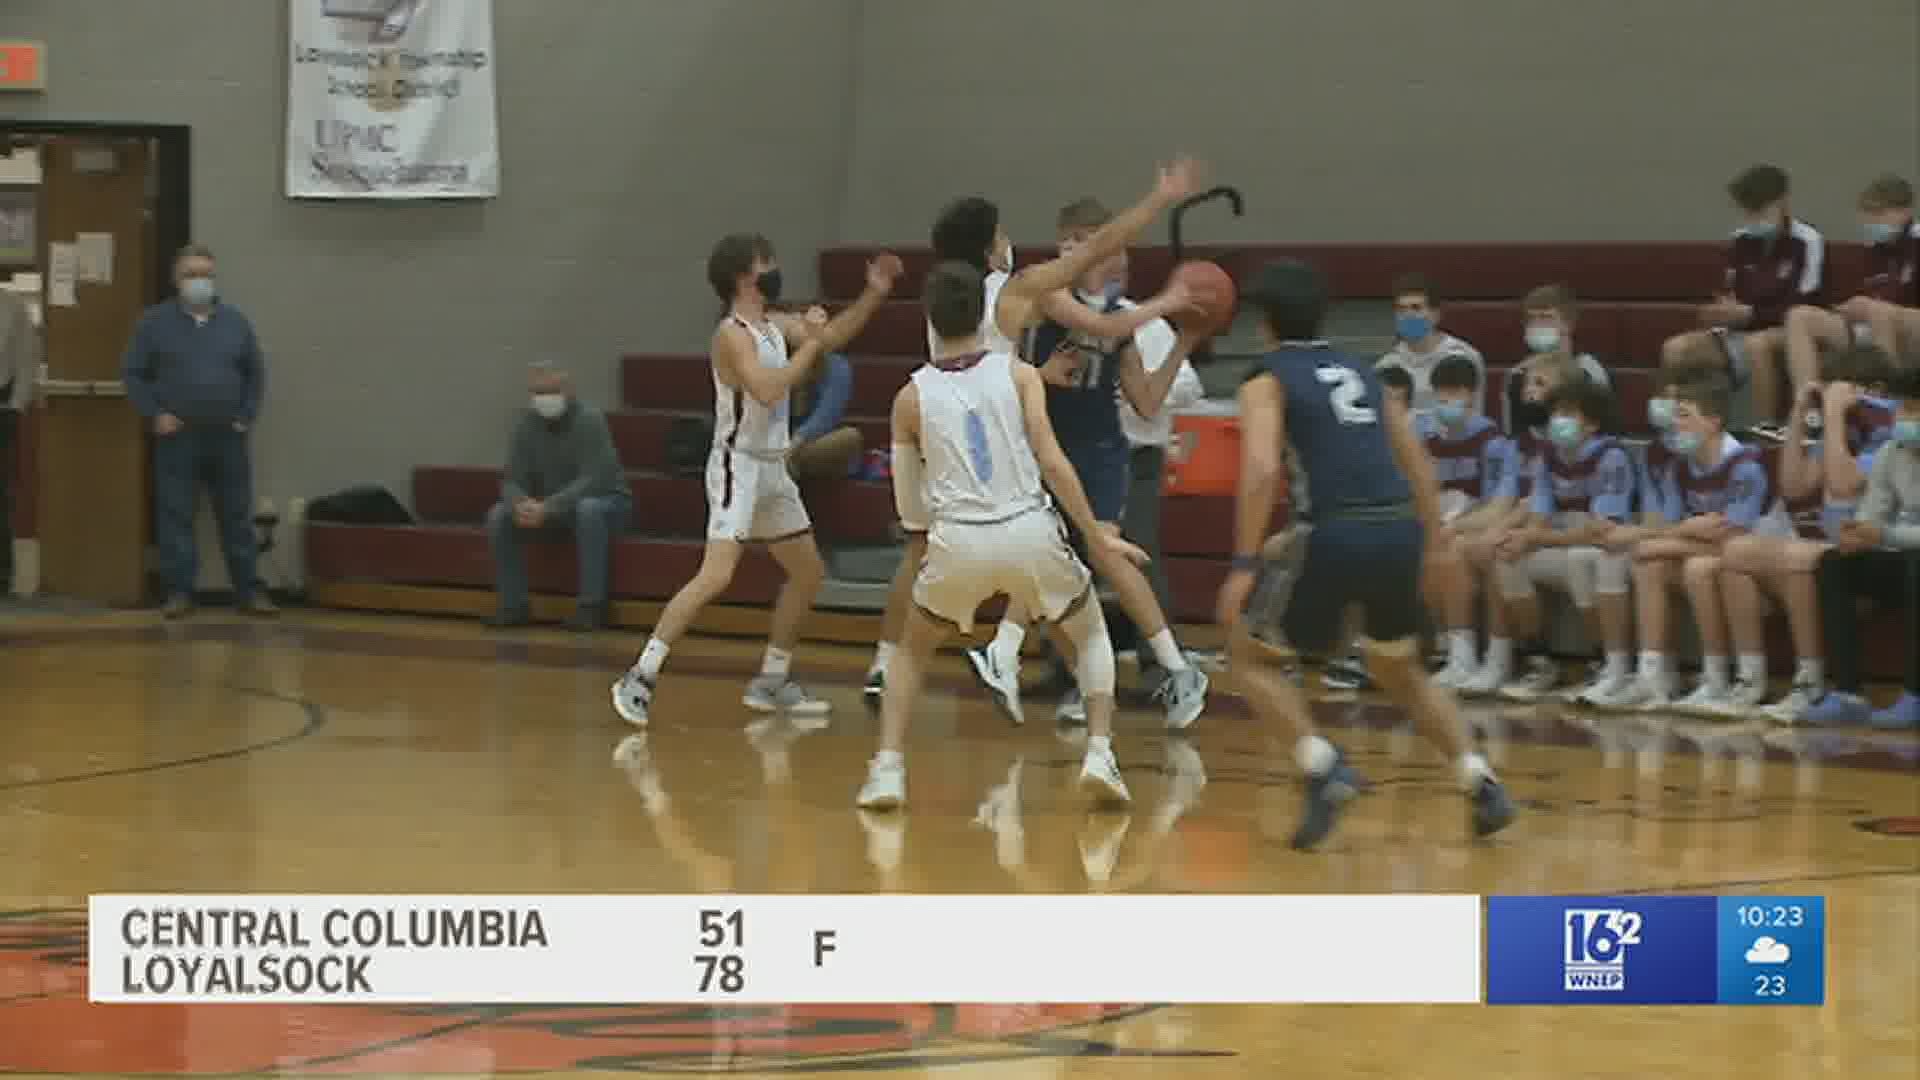 Loyalsock, without an injured Saraj Ali, ran past Central Columbia 78-51 in boys HS basketball